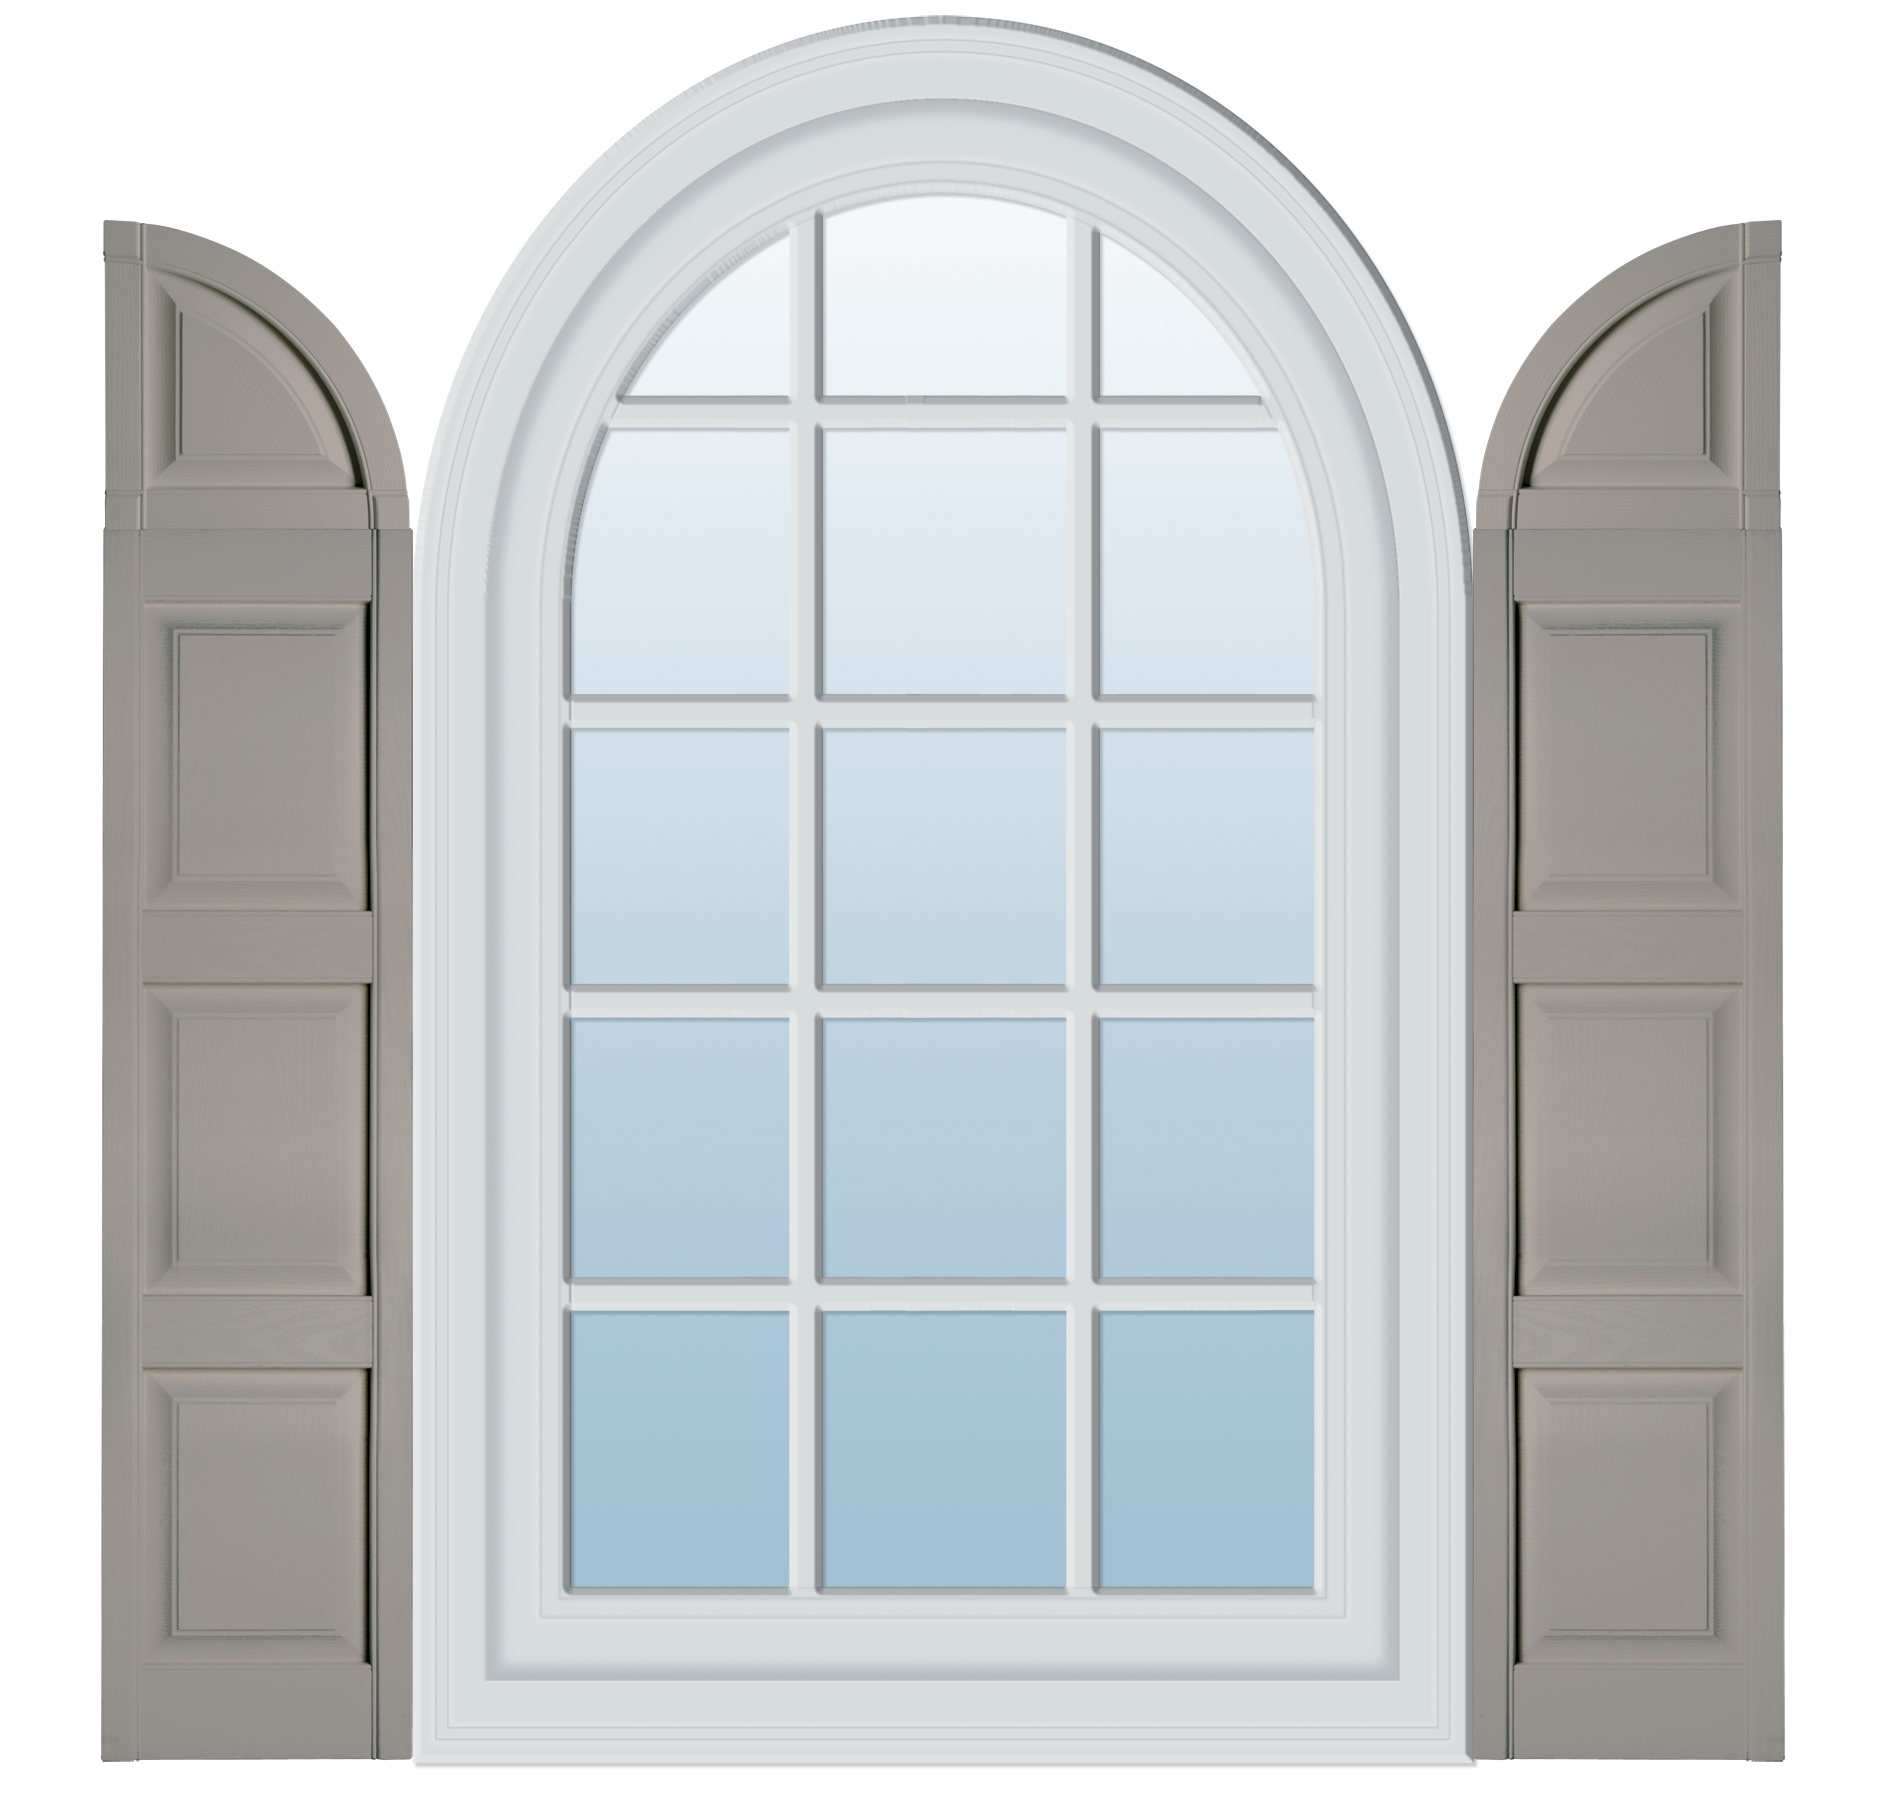 Specialty Panel Shutters with Quarter Round Archtop